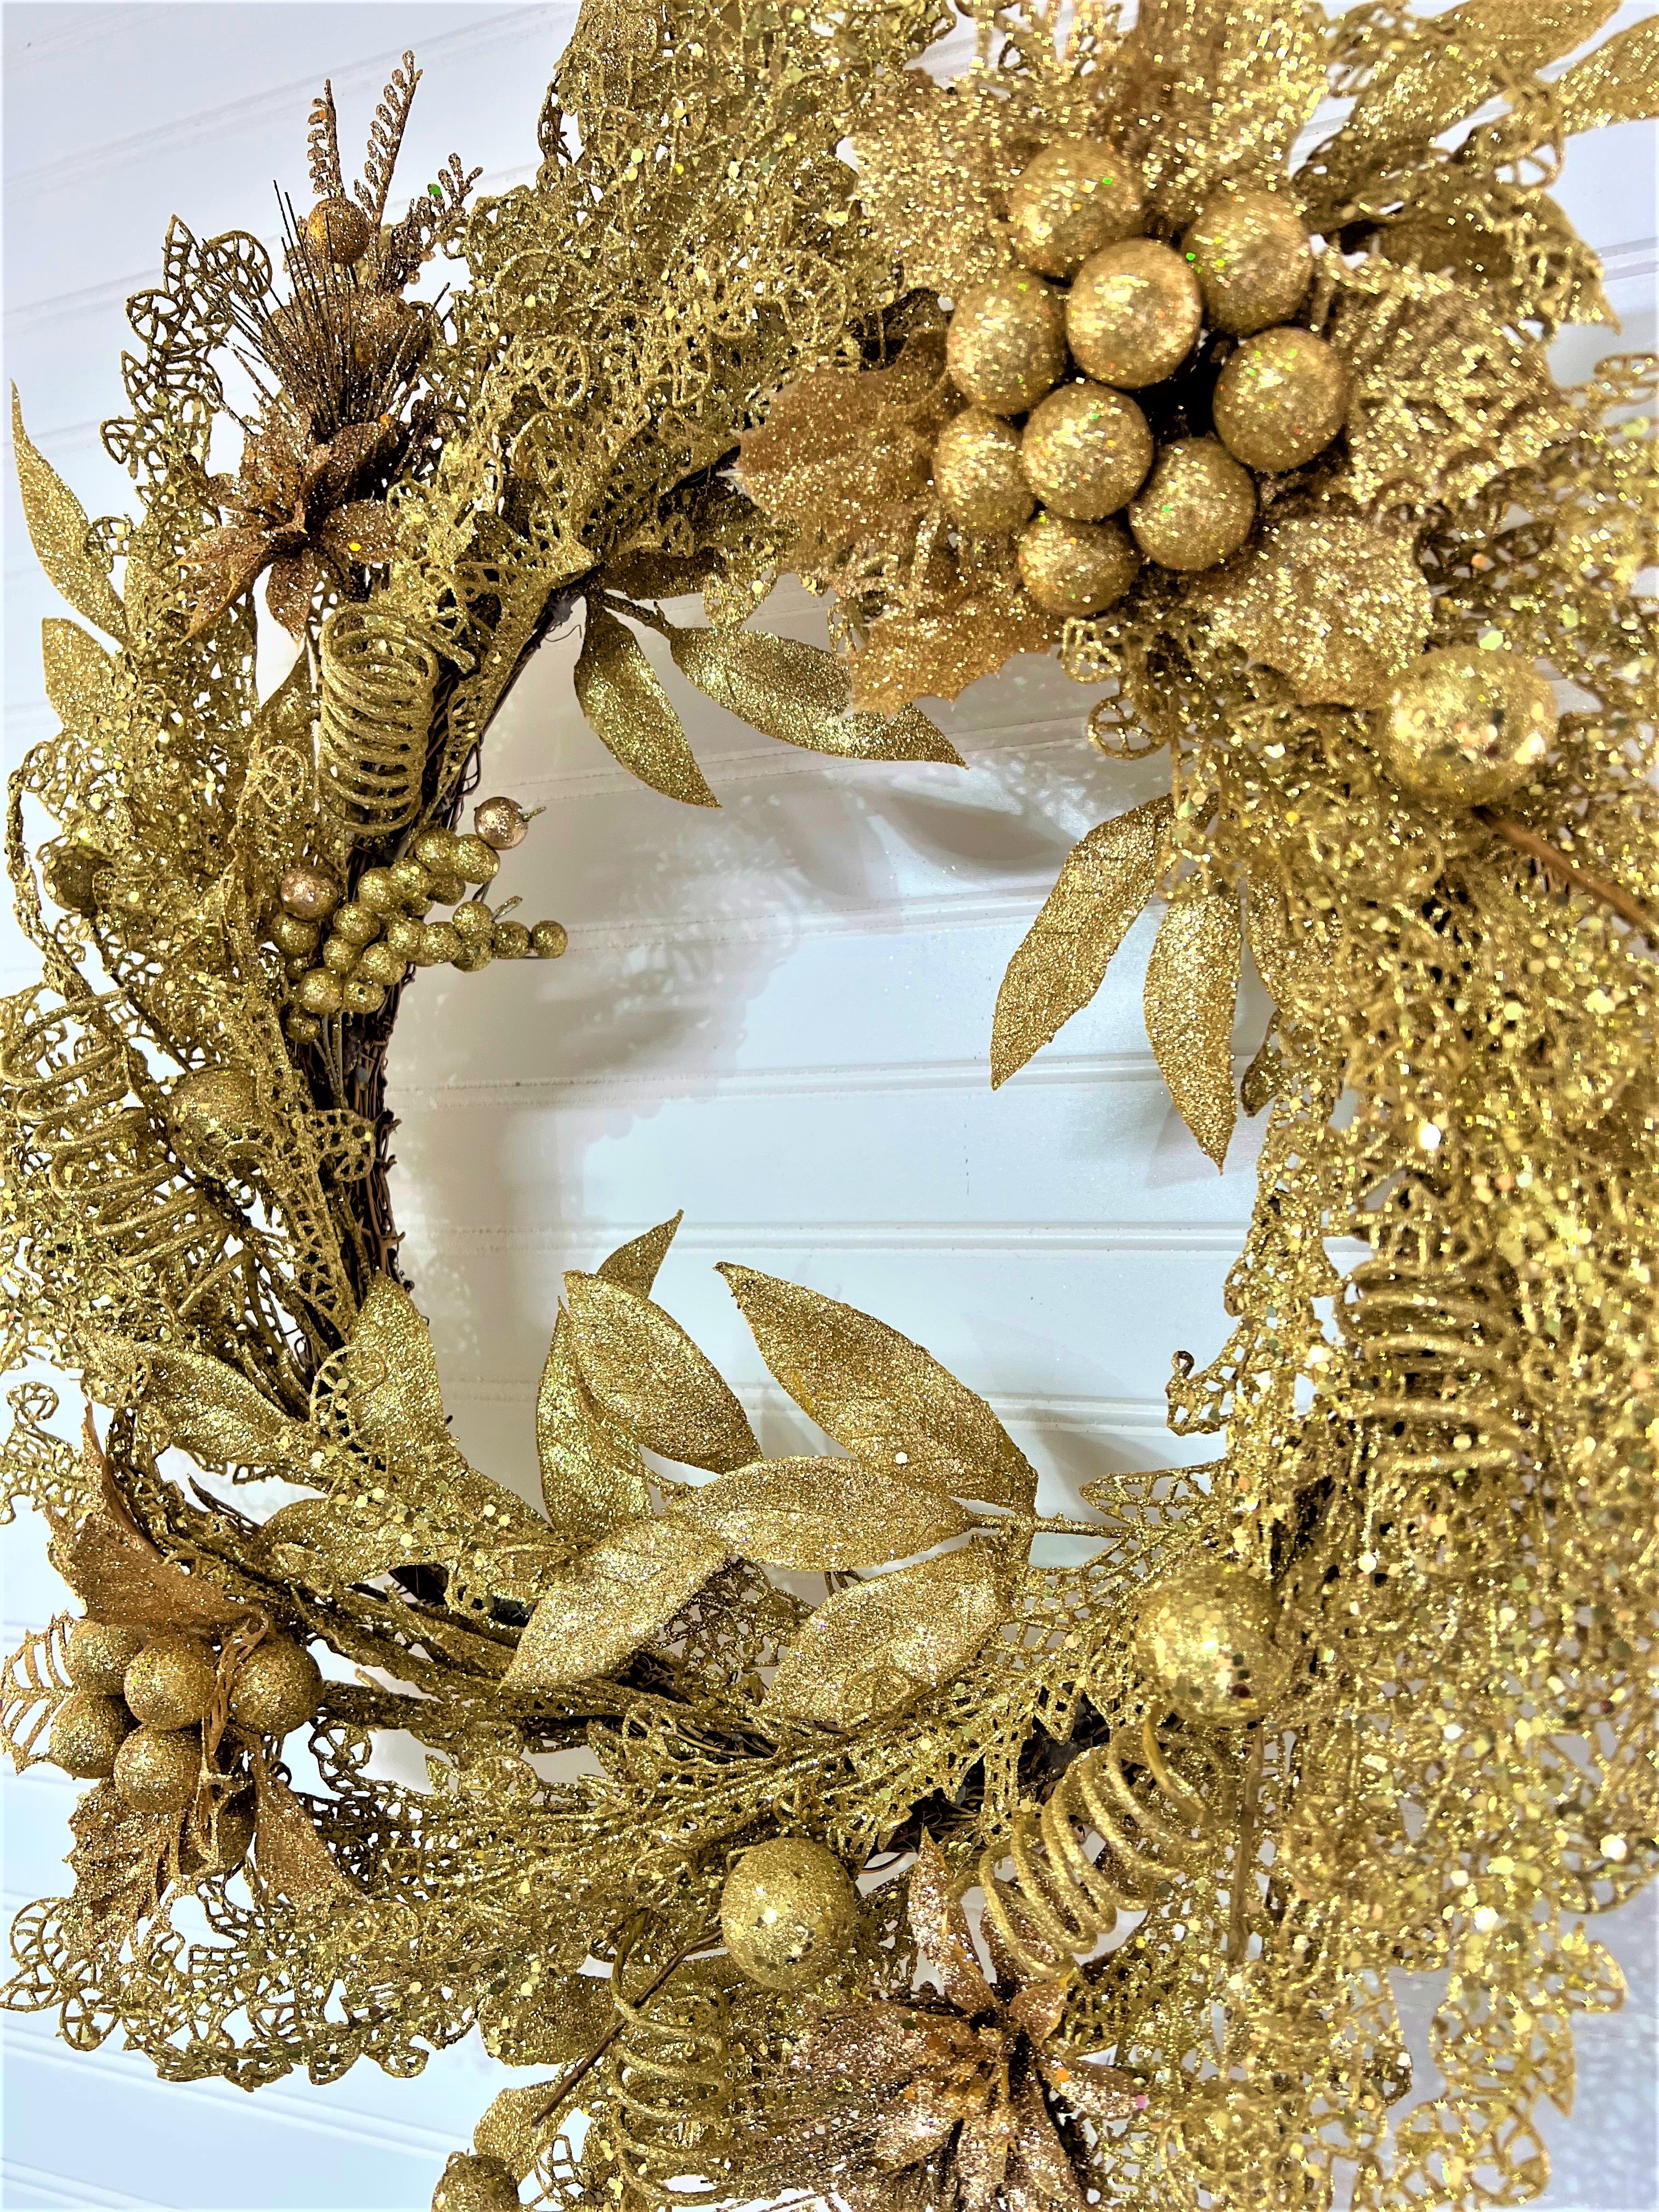 Gold Wreath With Berries 24" Christmas Wreath, Holiday Customized